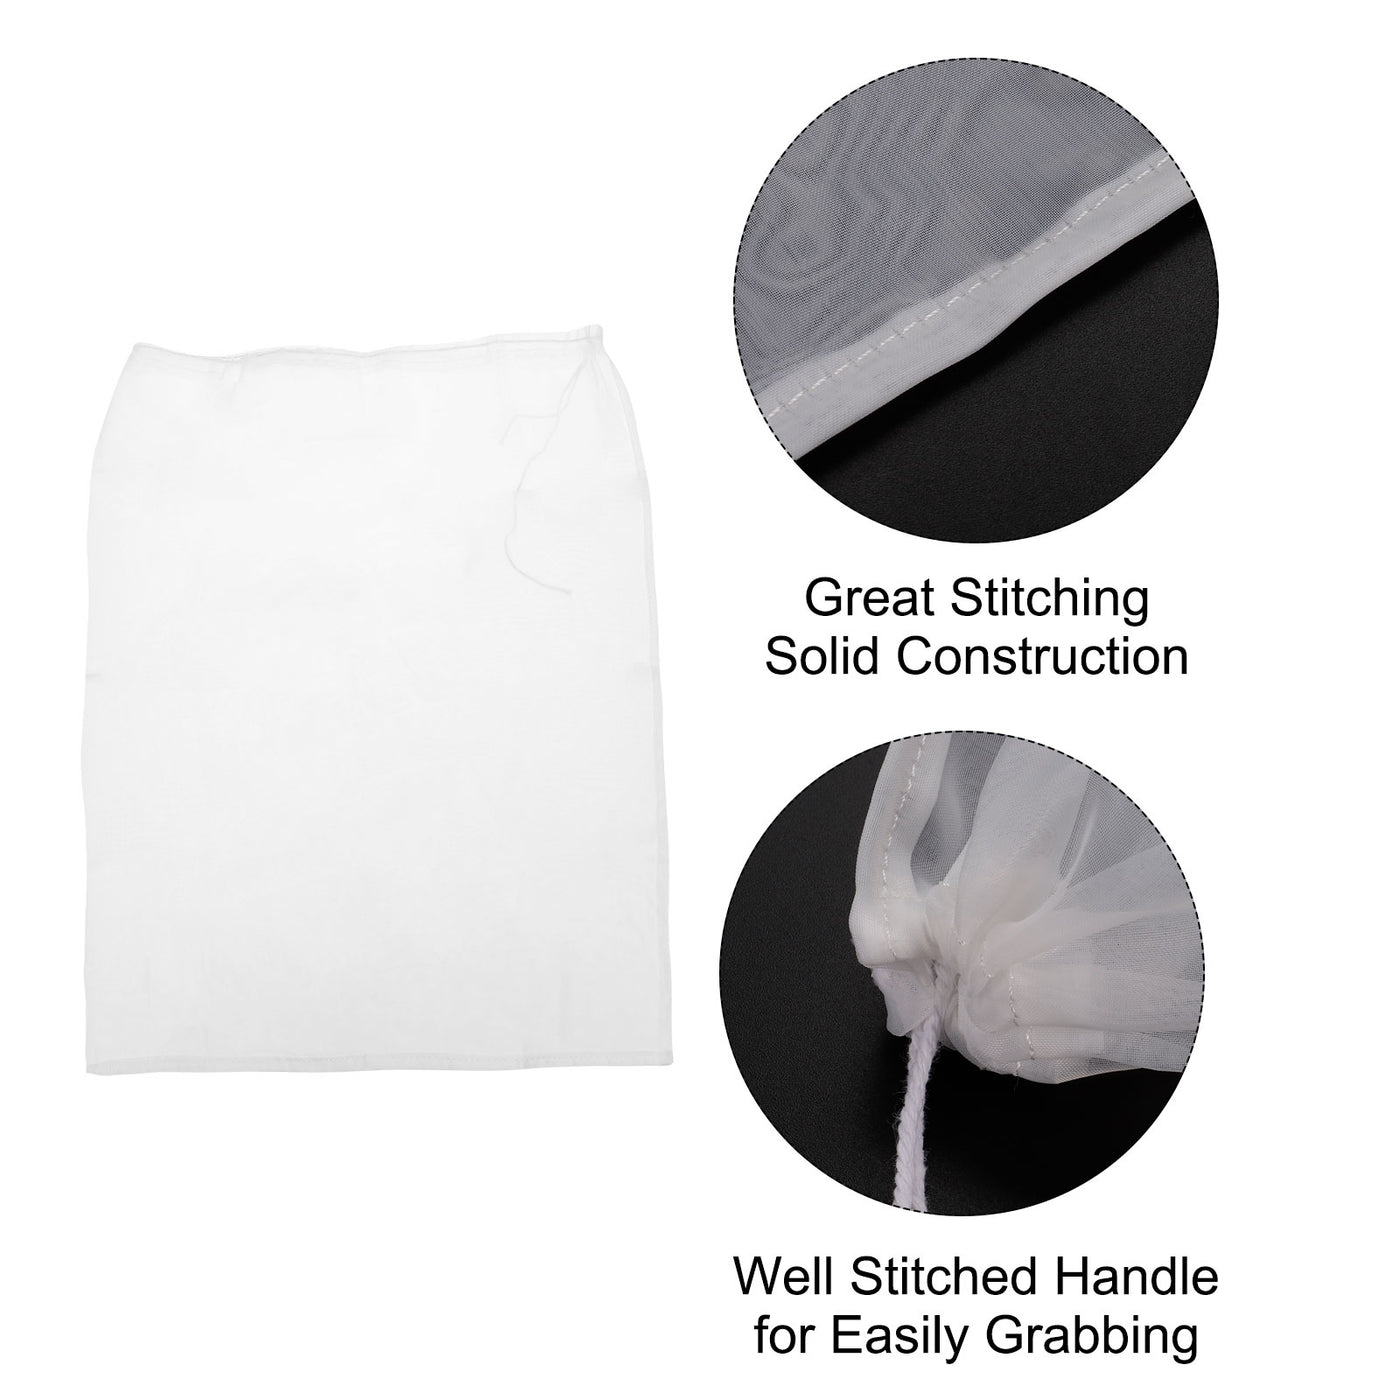 uxcell Uxcell Paint Filter Bag 100 Mesh (23.6"x17.7") Nylon Strainer for Filtering Paint